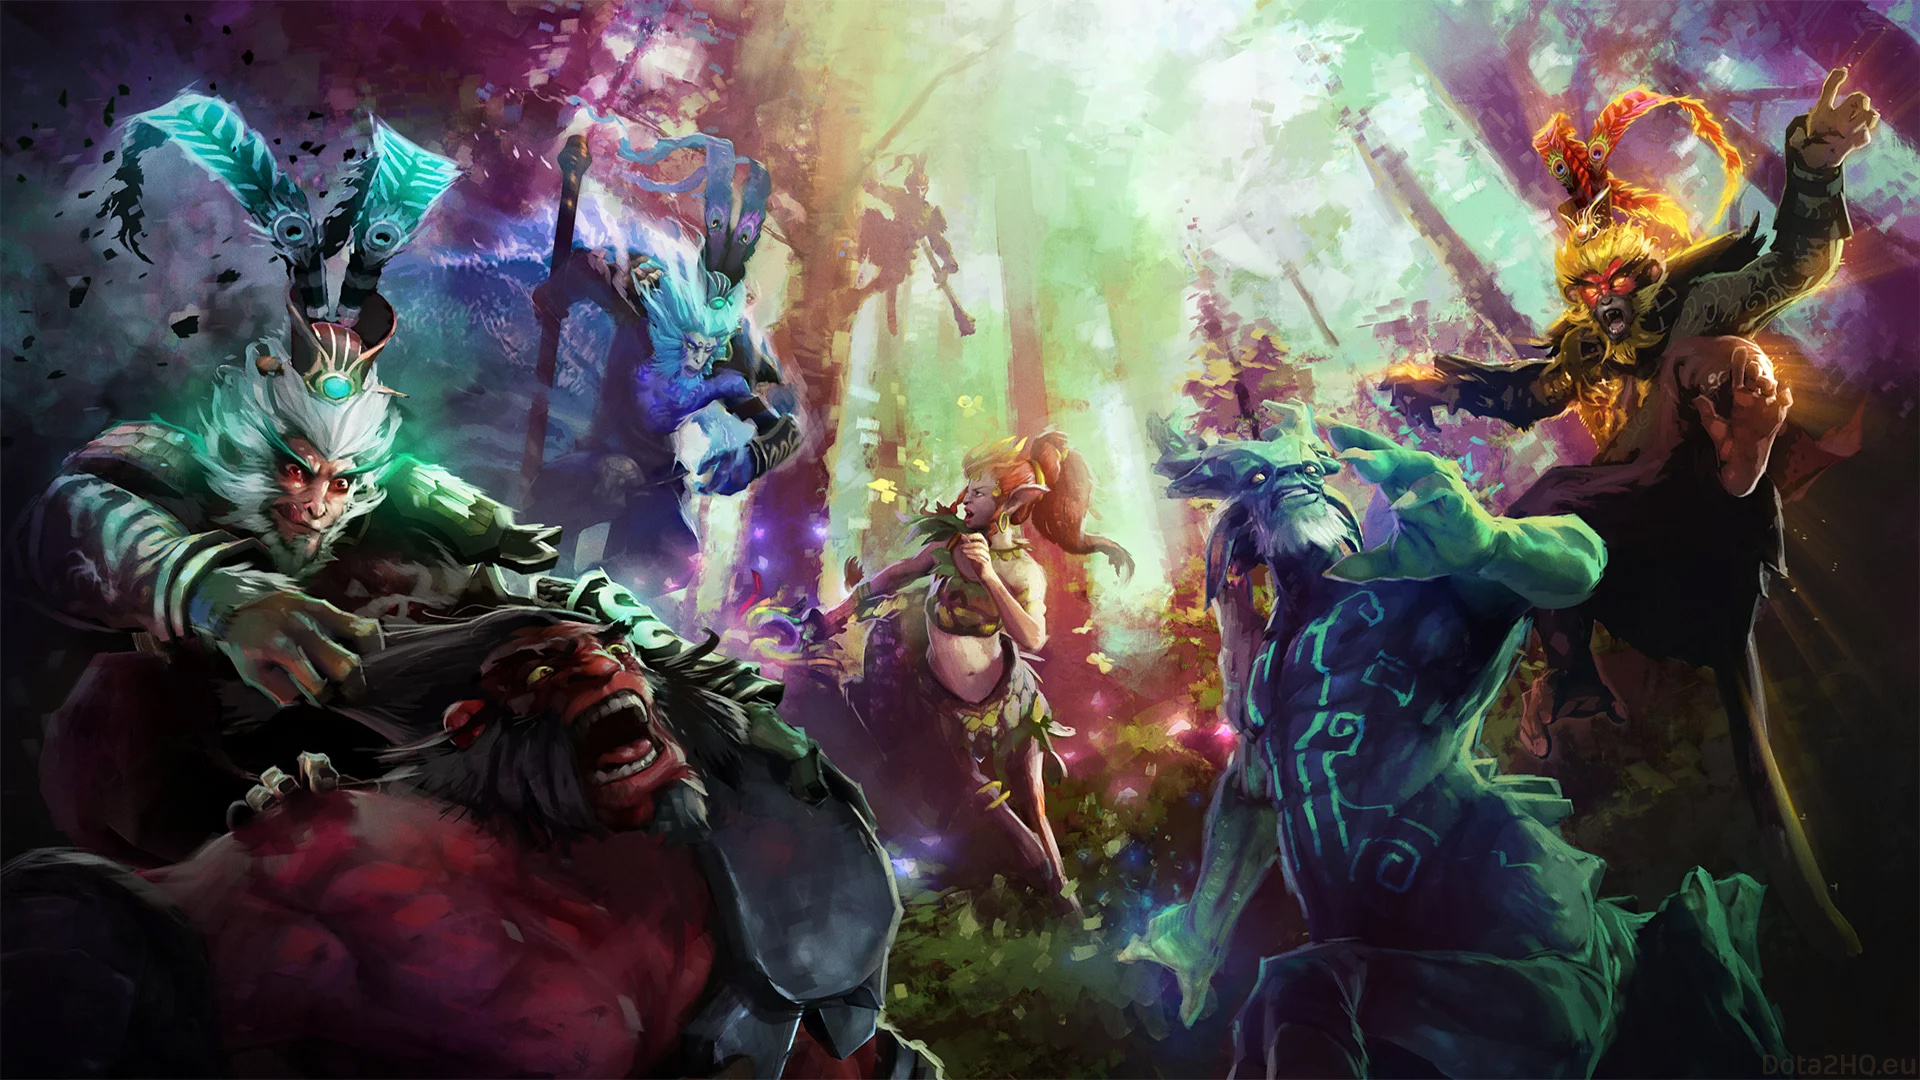 dota 2 arcana wallpaper,action adventure game,pc game,cg artwork,strategy video game,games